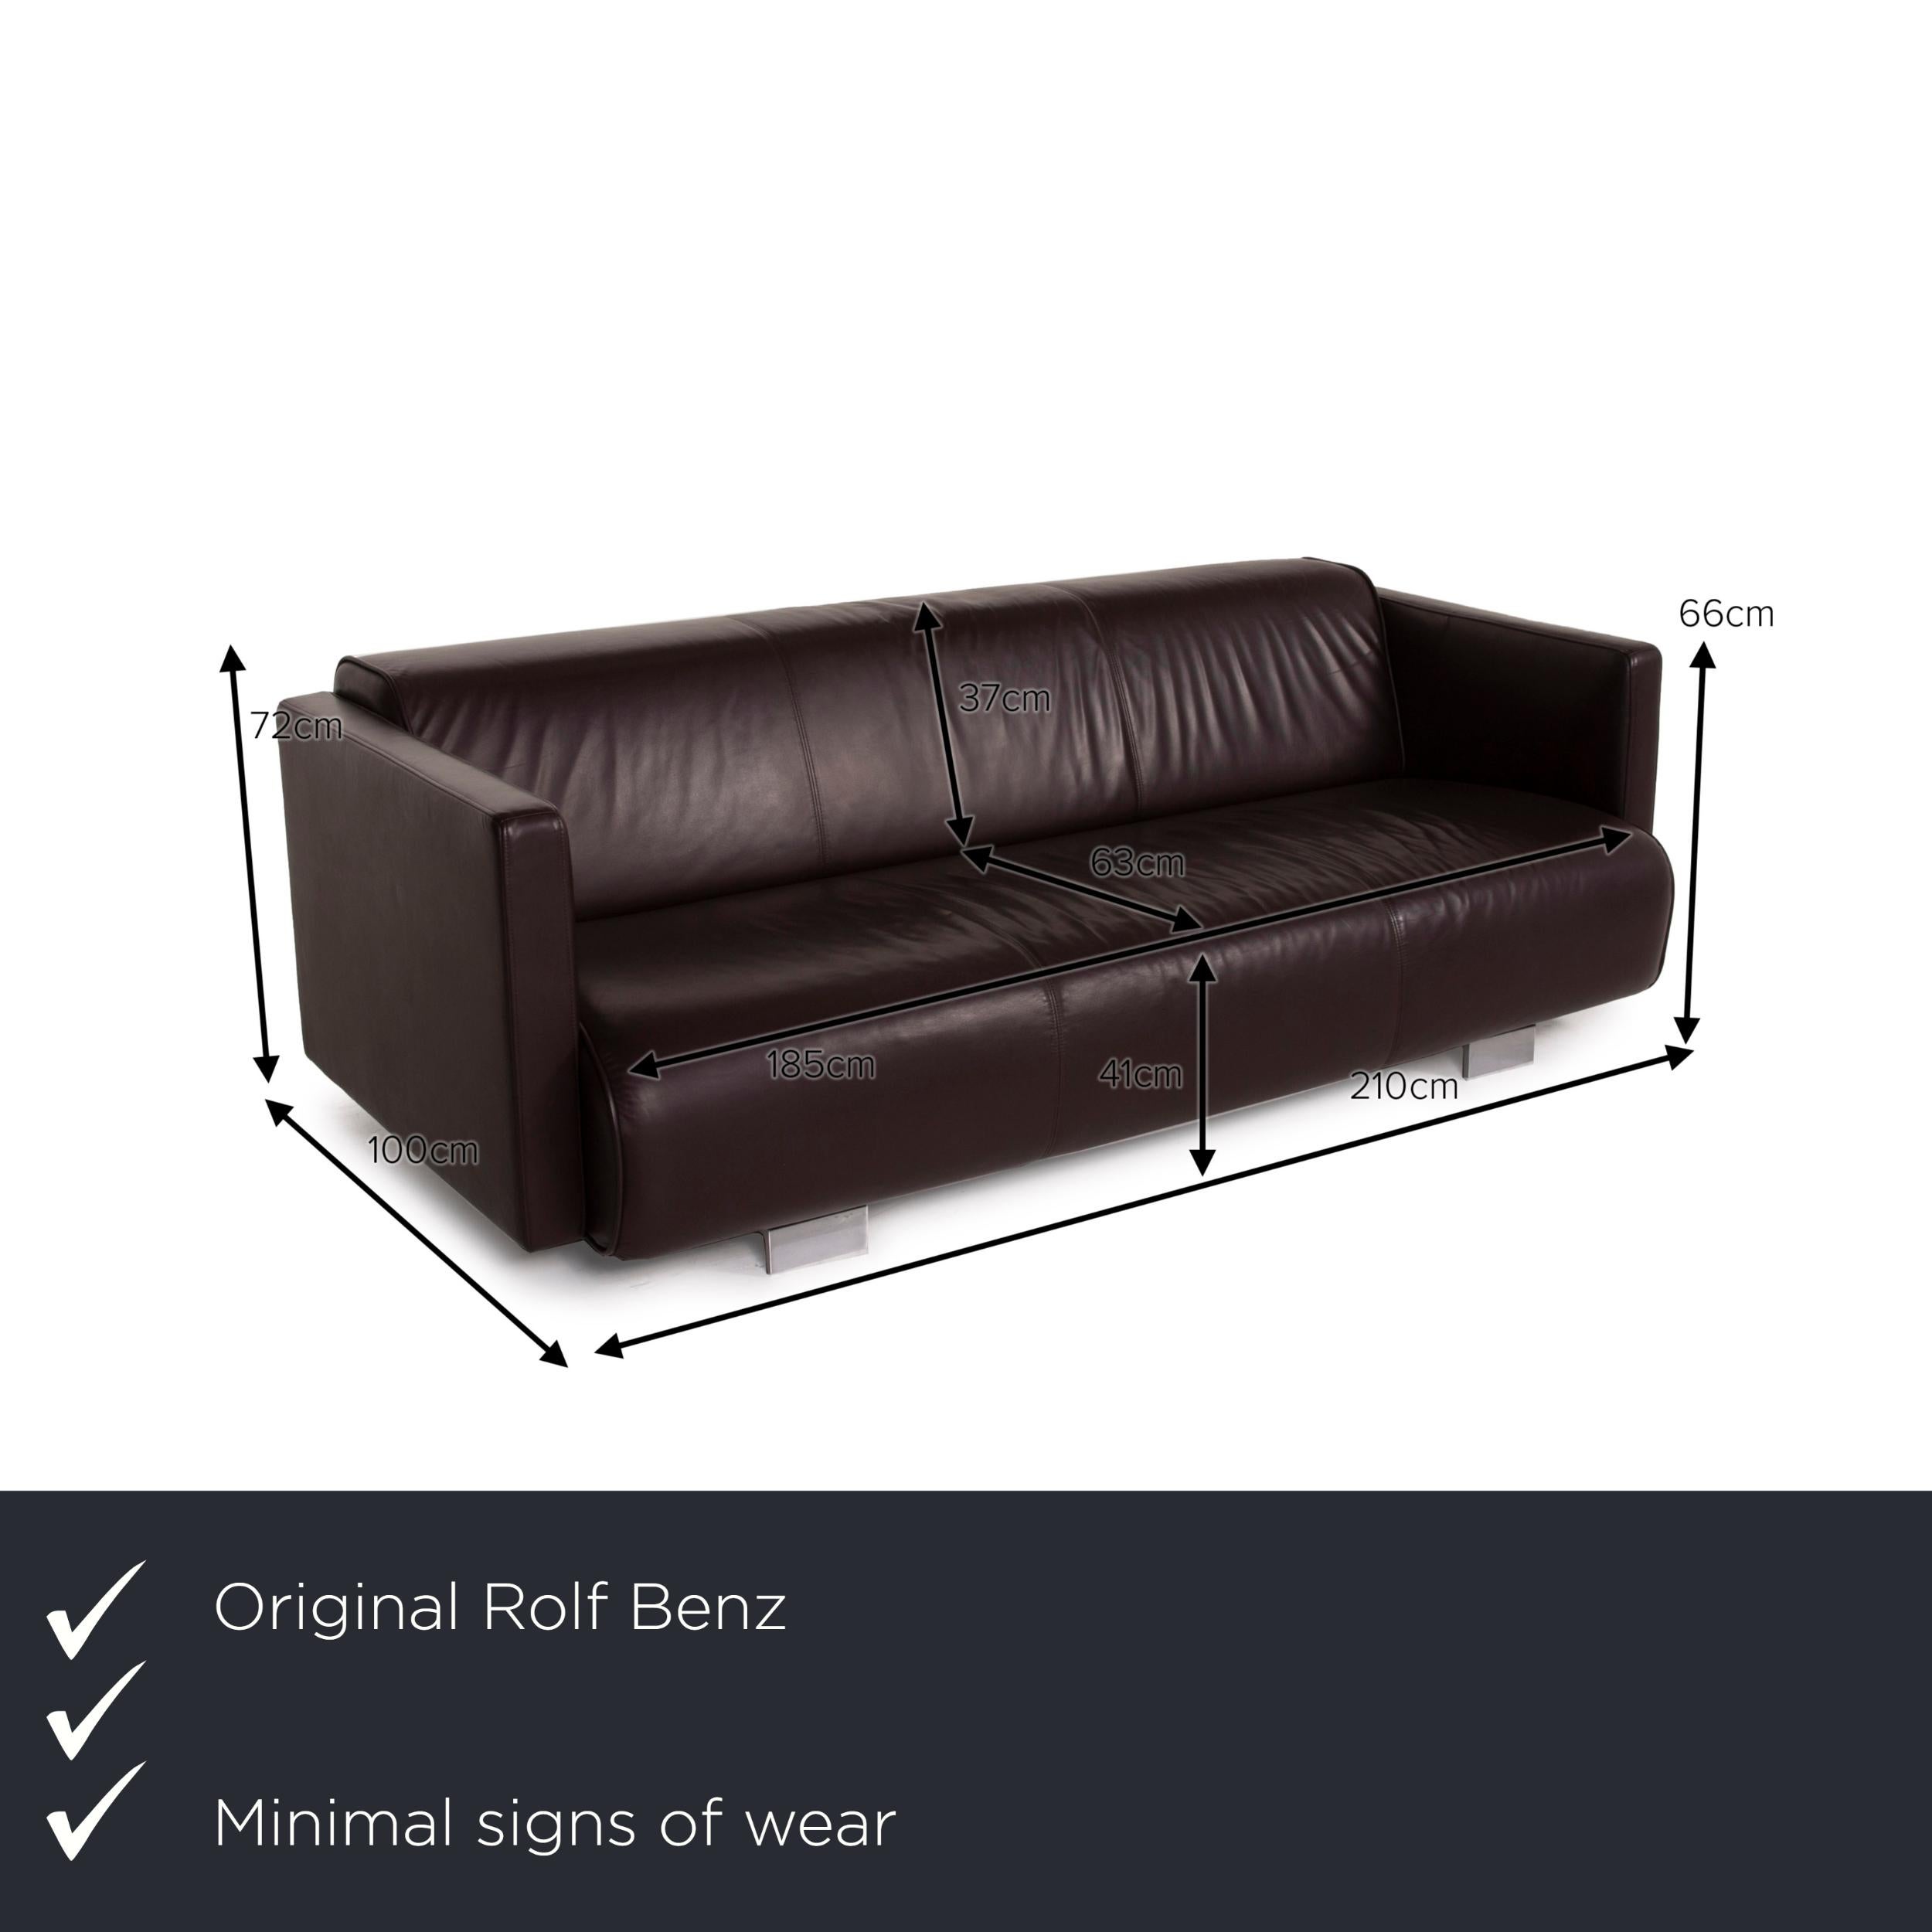 We present to you a Rolf Benz 6300 leather sofa black three-seater.


 Product measurements in centimeters:
 

Depth: 100
Width: 210
Height: 72
Seat height: 41
Rest height: 66
Seat depth: 63
Seat width: 185
Back height: 37.
 